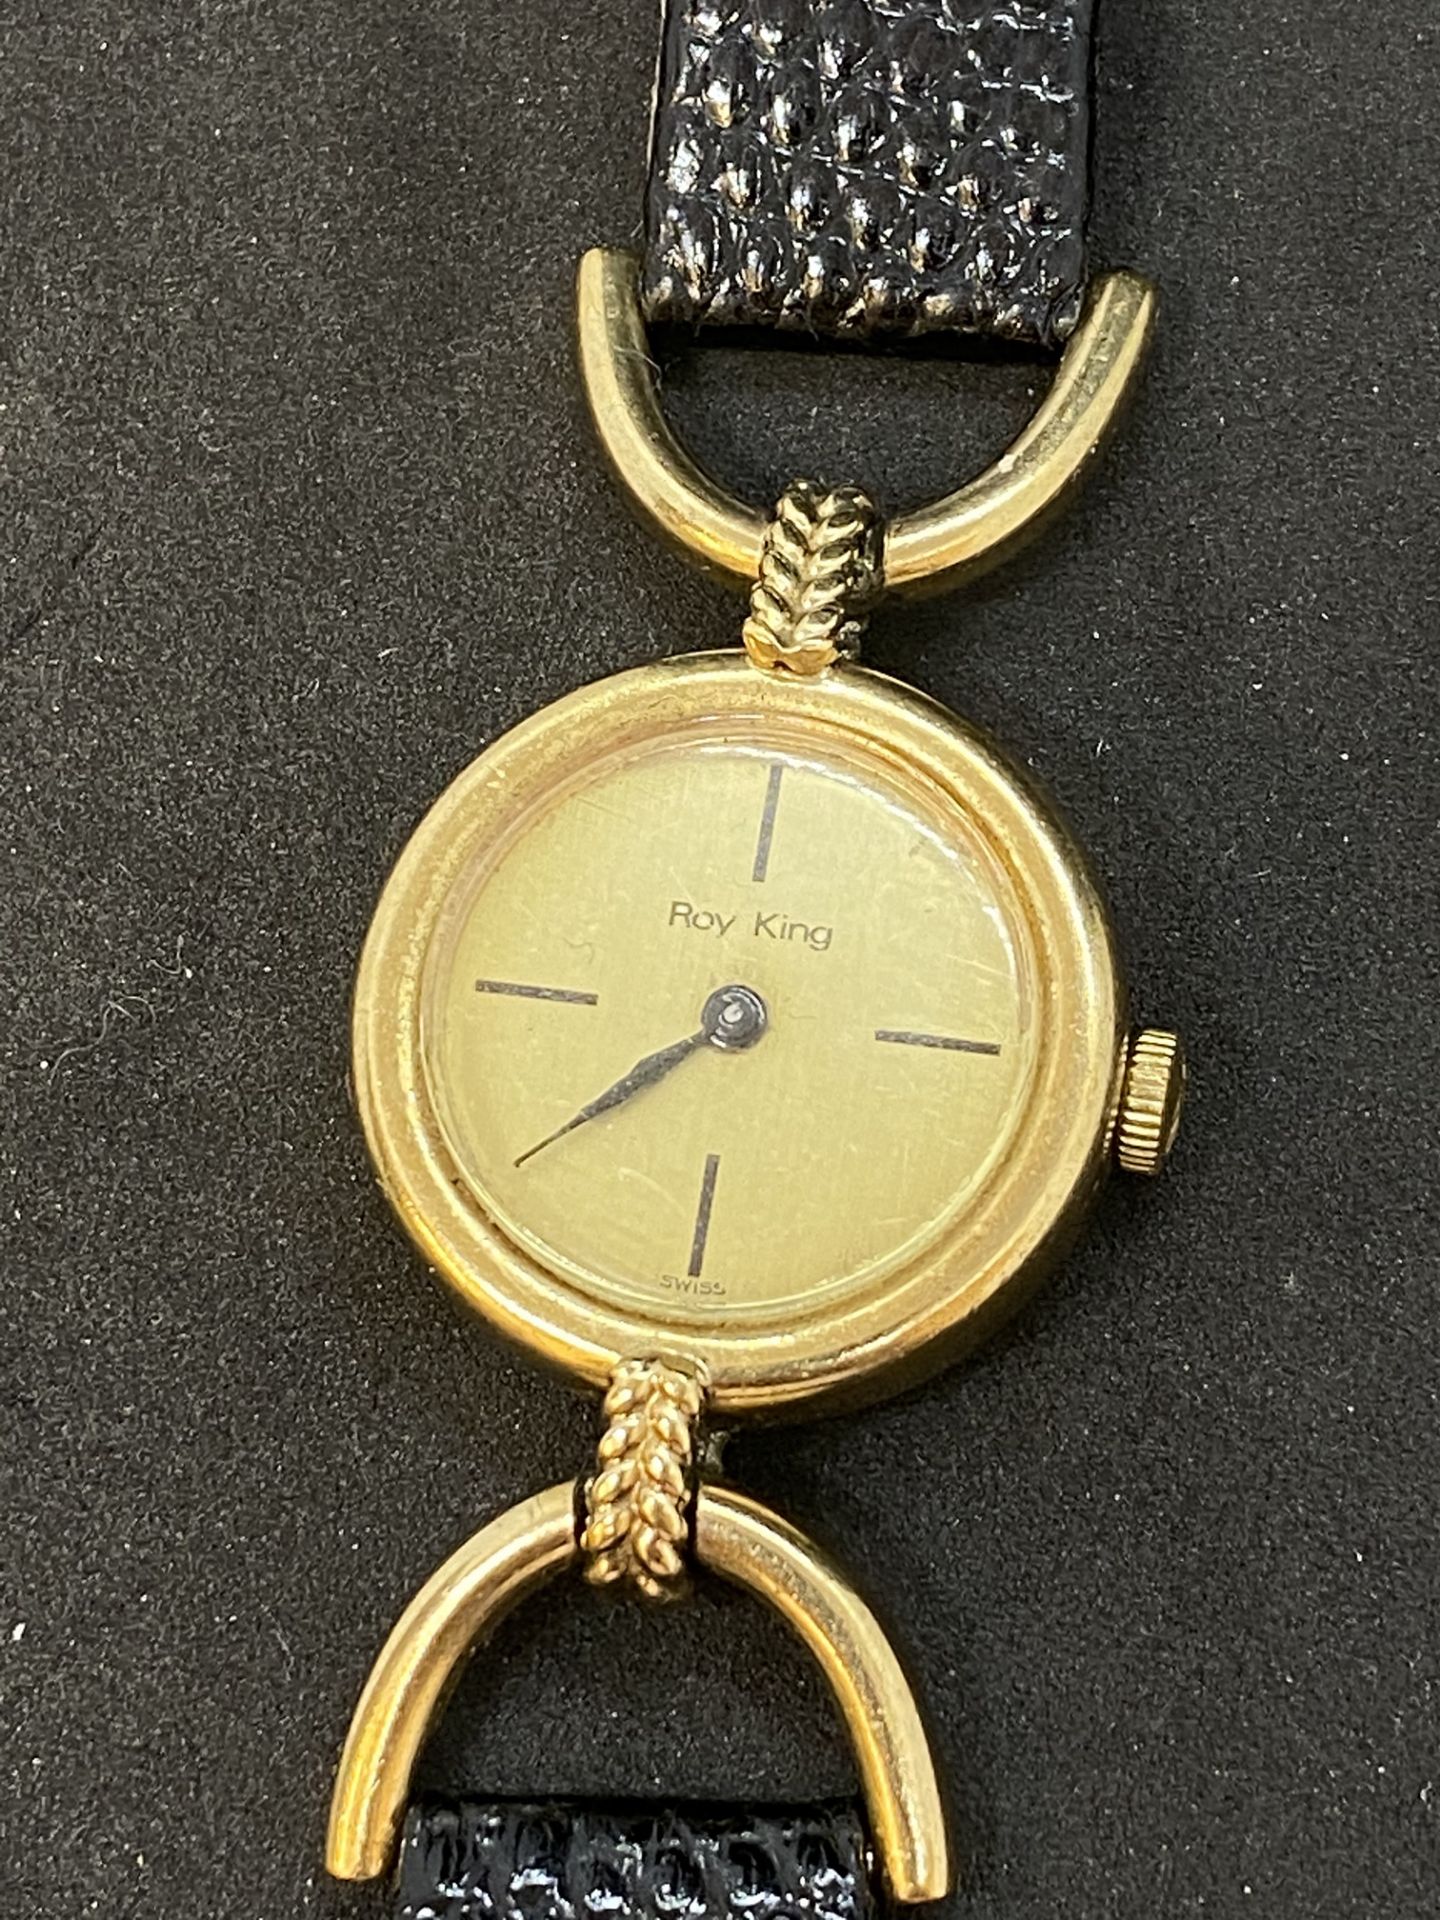 ROY KING 9CT GOLD WATCH - 19 GRAMS - Image 5 of 6